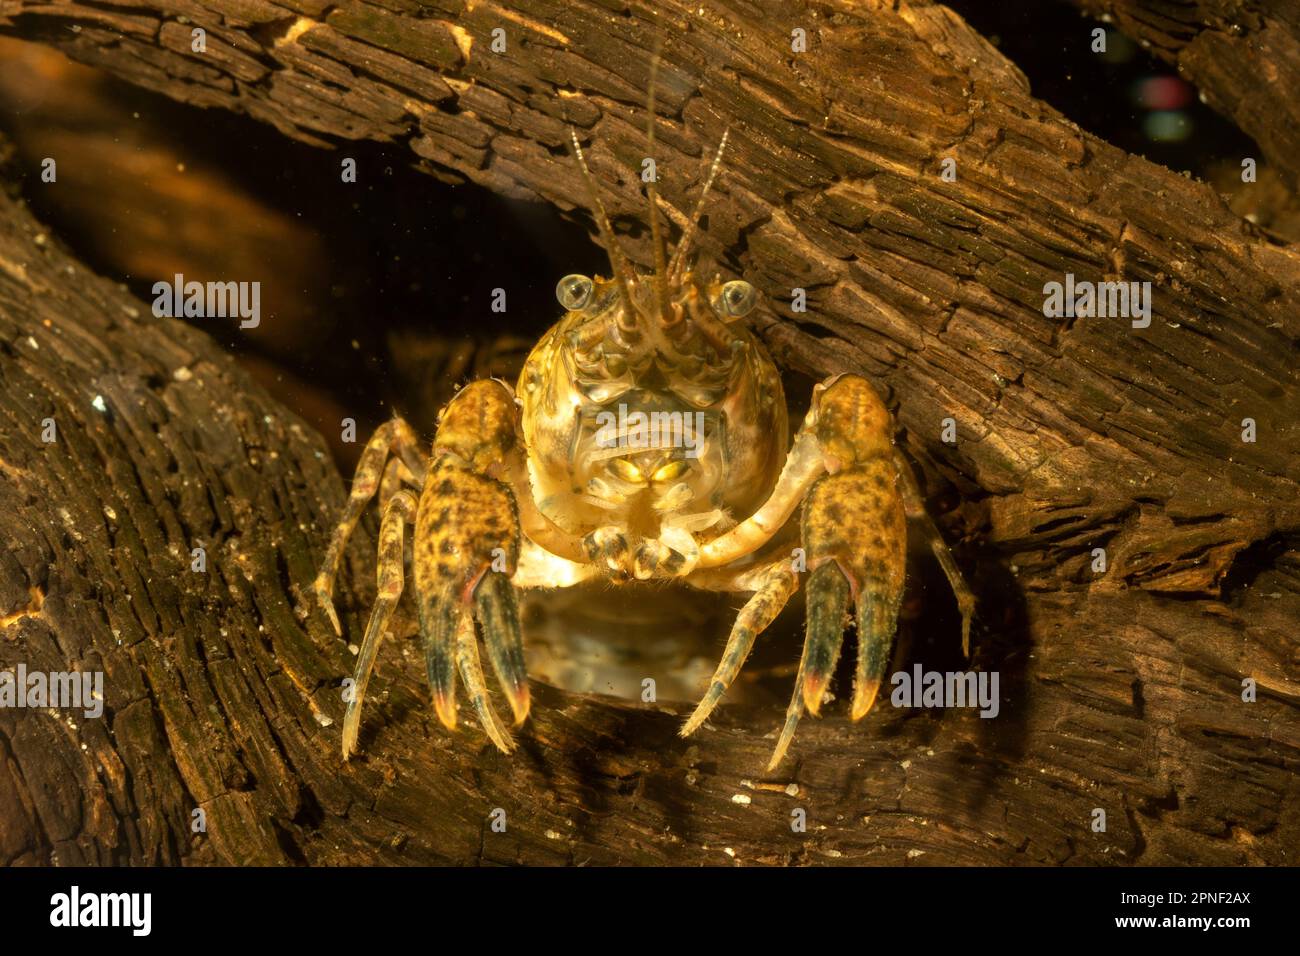 Spinycheek crayfish, American crayfish, American river crayfish, Striped crayfish (Orconectes limosus, Cambarus affinis), lurking in a dweilling cave Stock Photo